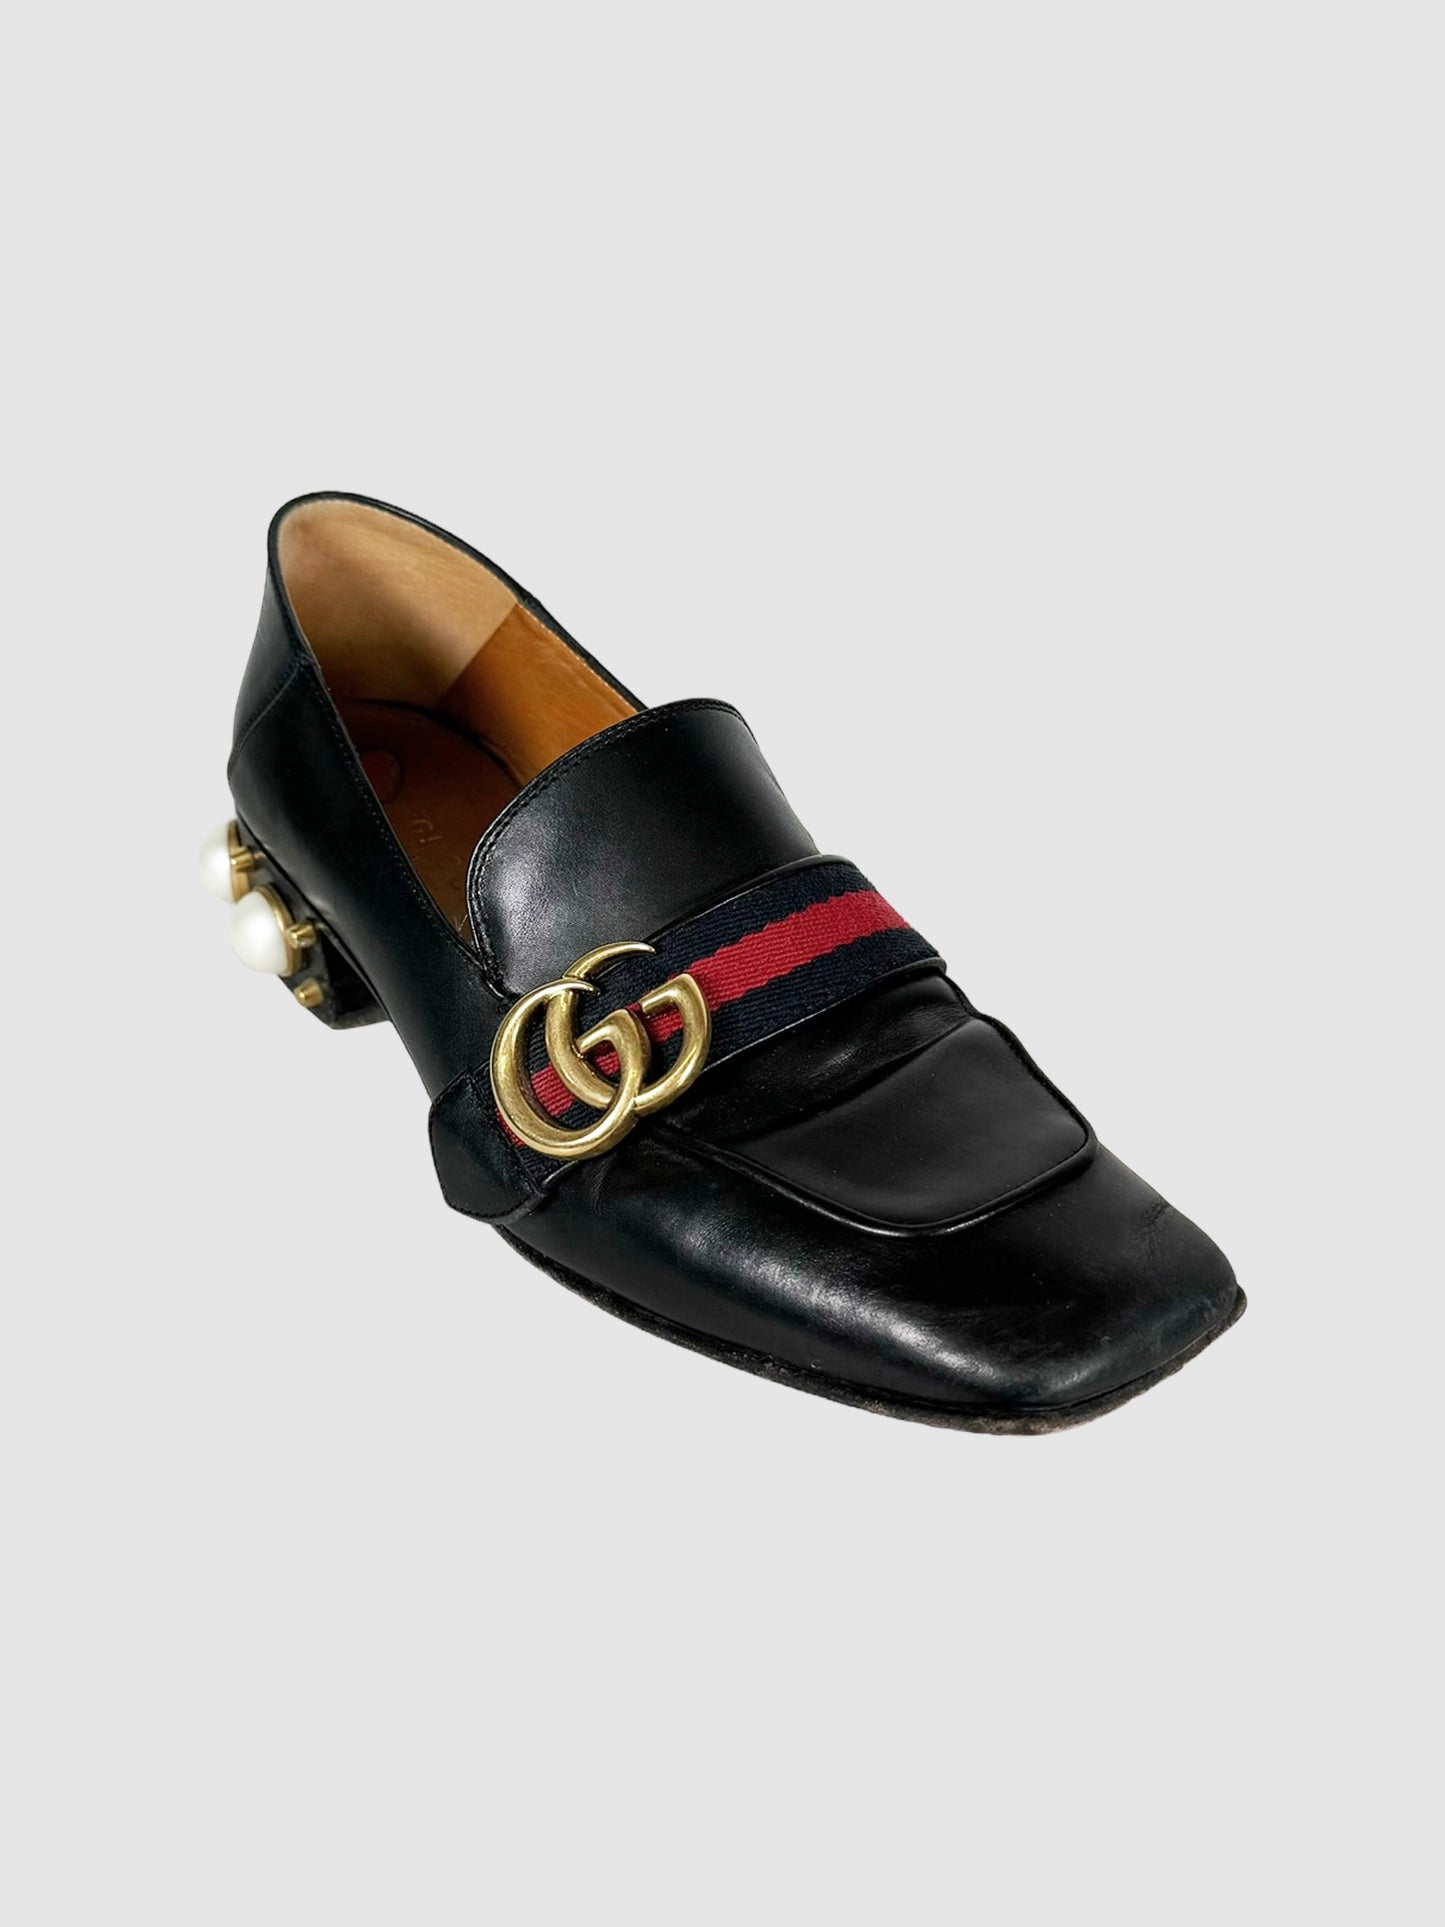 Gucci Faux Pearl Leather Loafers - Size 37.5